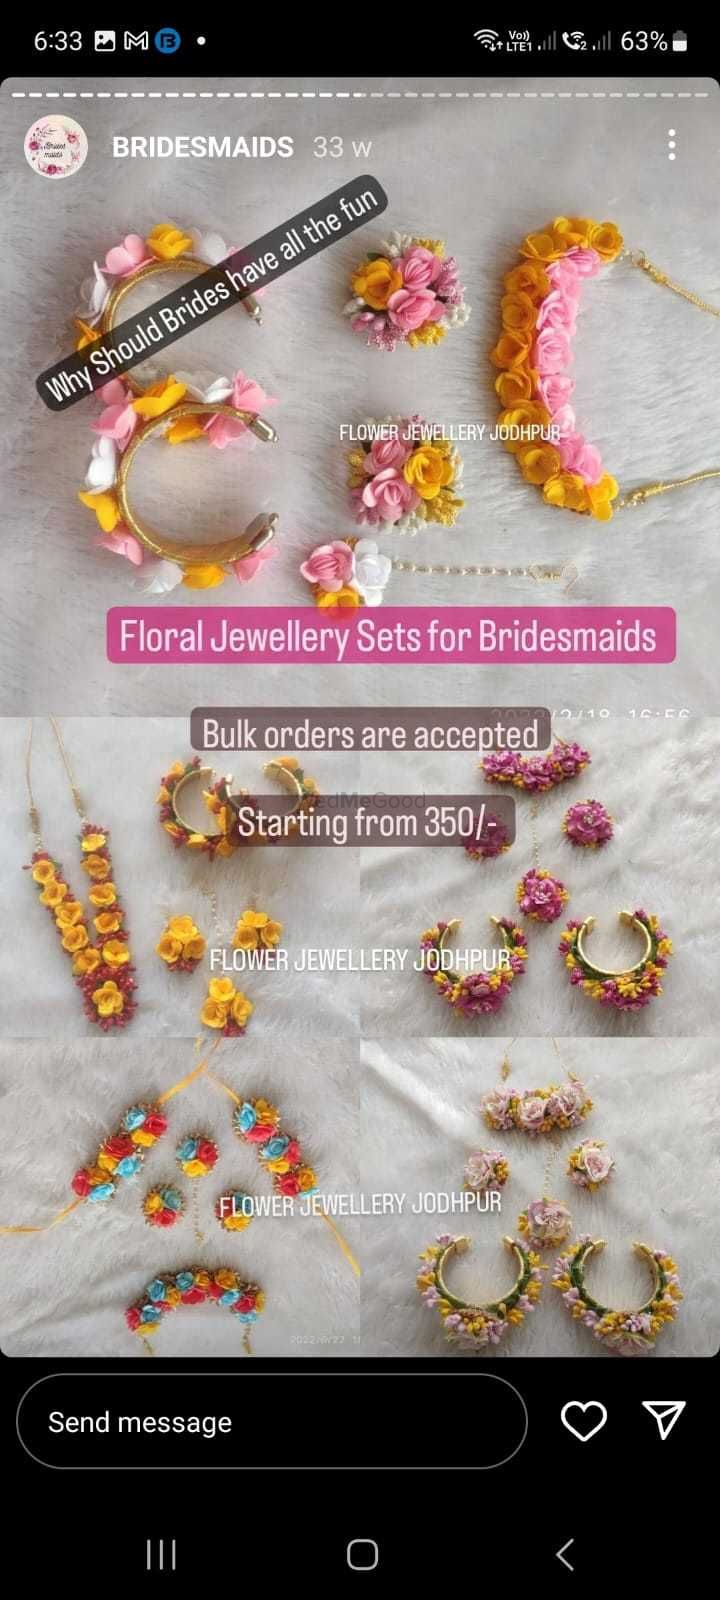 Photo From BRIDESMAIDS GIFTS - By Flower Jewellery Jodhpur